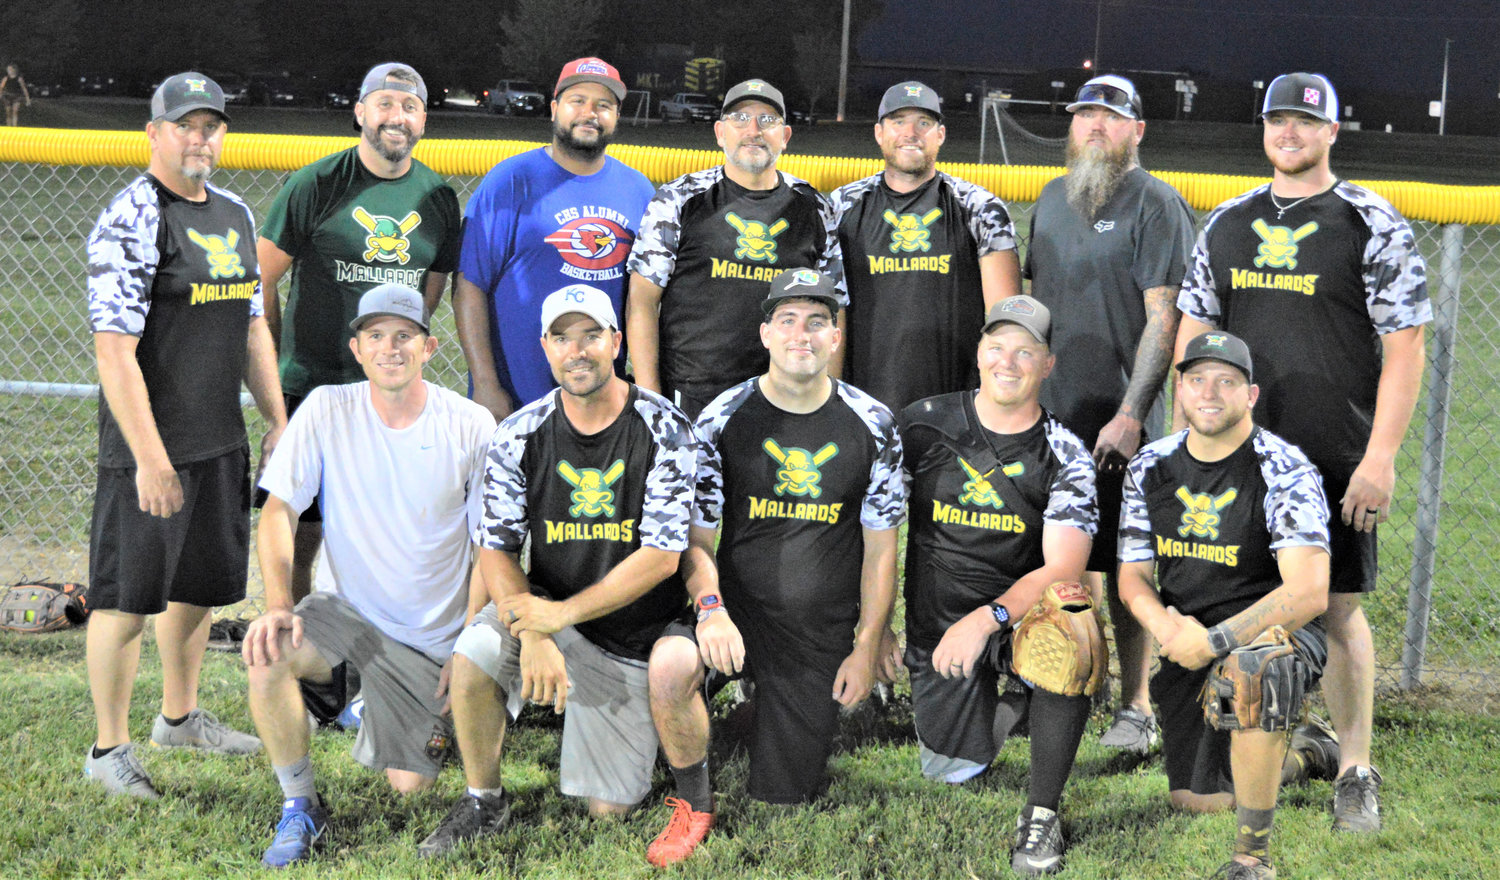 THE MEN'S SLO-PITCH TOURNAMENT CHAMPIONSHIP went to Mallard's with a 4-0 win over Jolley's.  Champions include,  back row (L to R): Chad Mantonya, Jake Kenney, Dre Steward, Aaron Potter, Stetson Skirky, Josh Berg and Brady Munsterman. Front row: Austin Holt, Travis Munsterman, Zach Adams, Ethan Olson, and Lenny Kubilus. Not pictured: Jordan Daugherty, Bryan Himes and Tyler Pulcini.